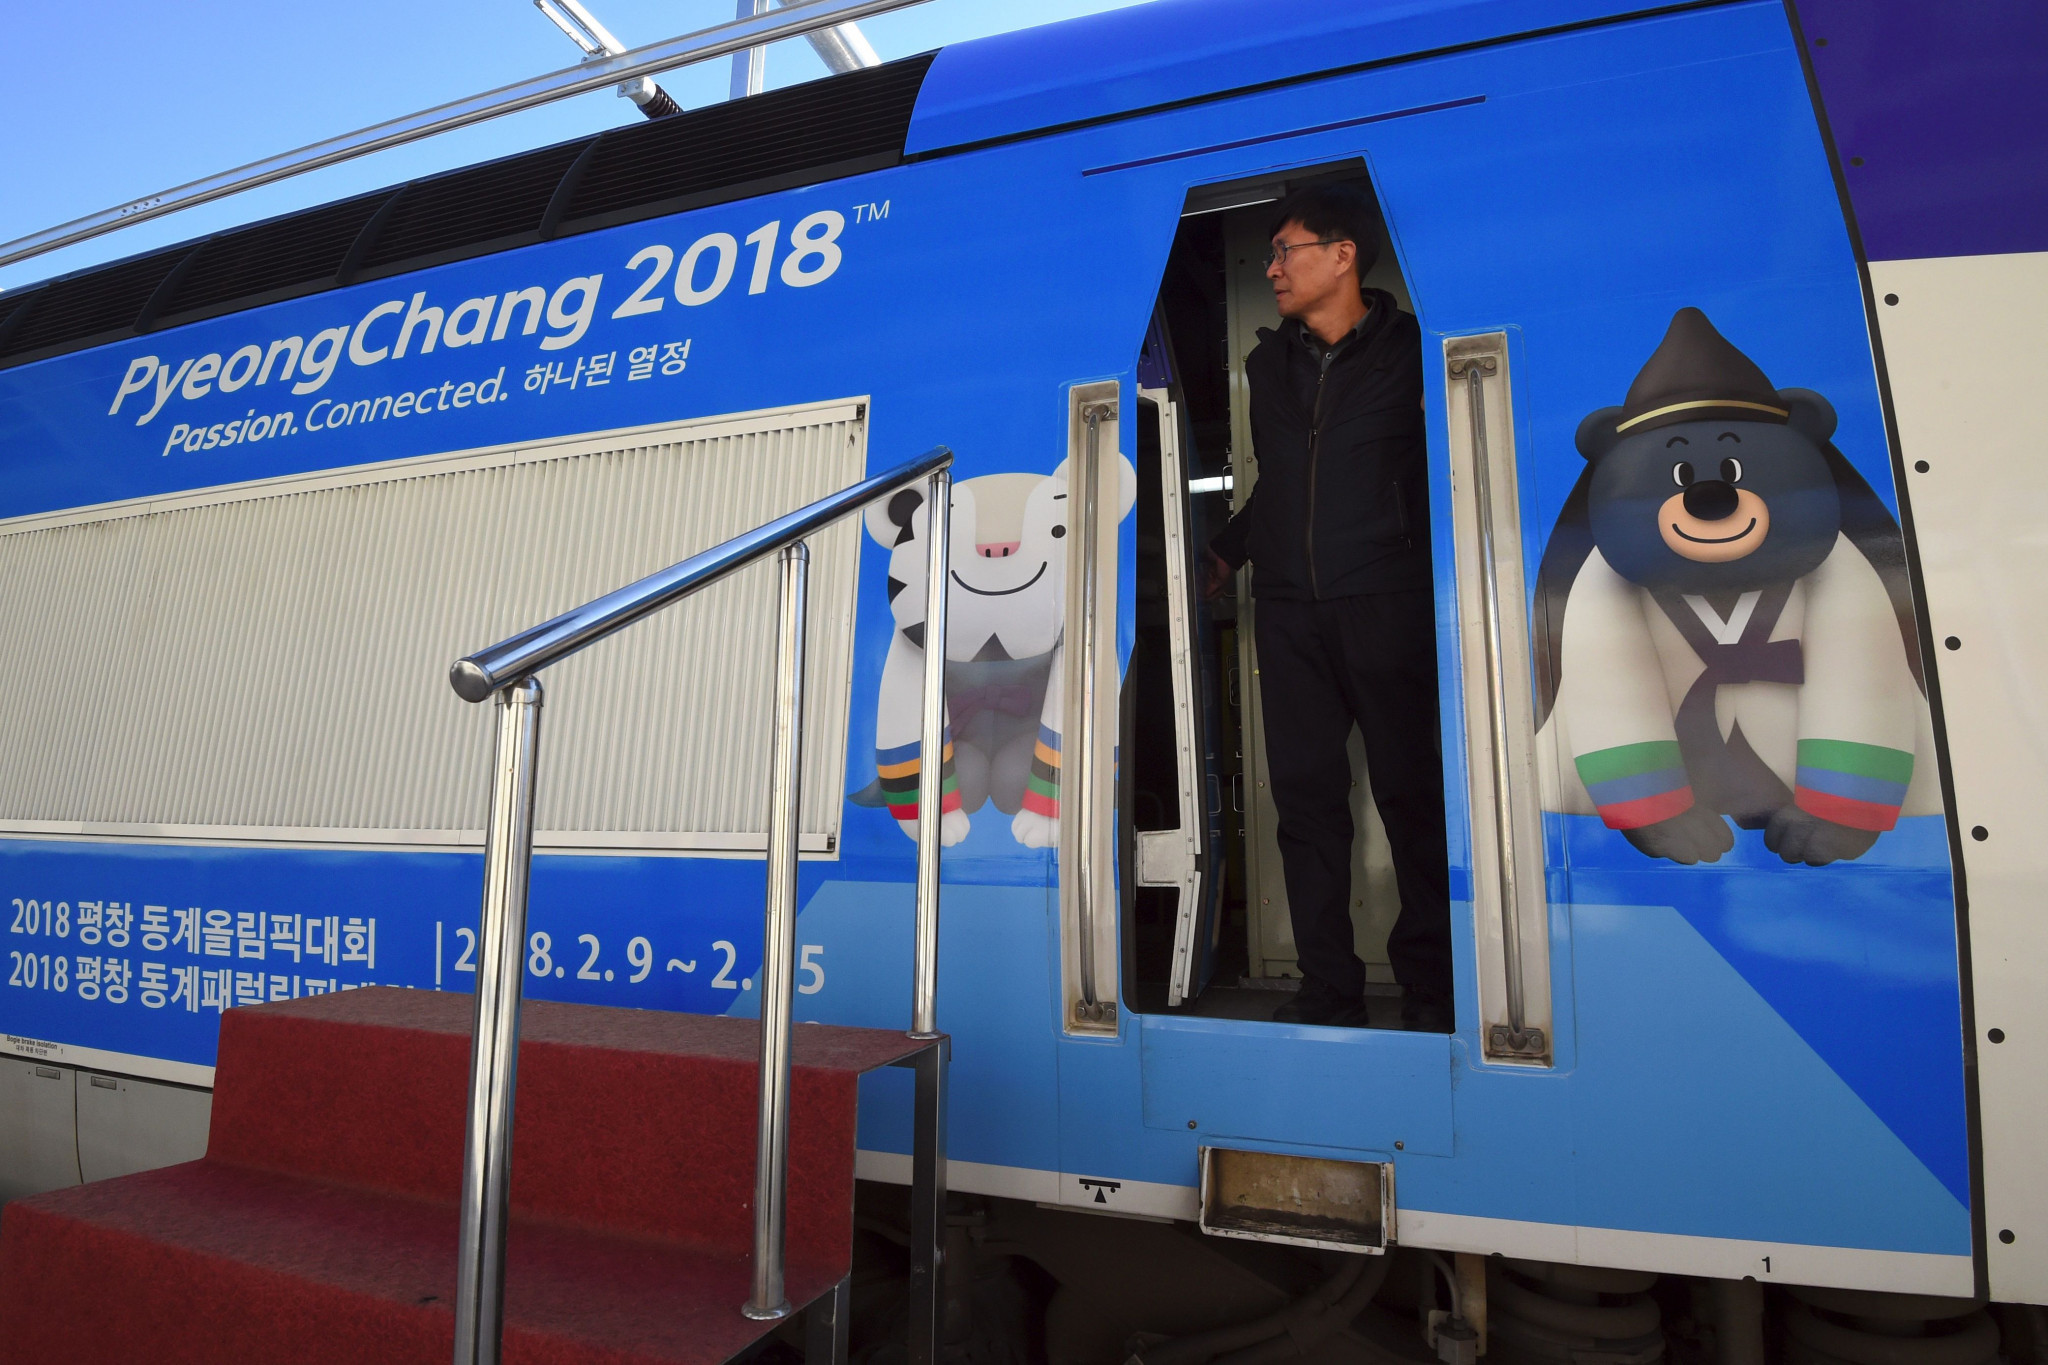 The high-speed train that will be used to transport passengers to the venues for the Pyeongchang 2018 Winter Olympic Games has been opened to the public today in Seoul ©Getty Images